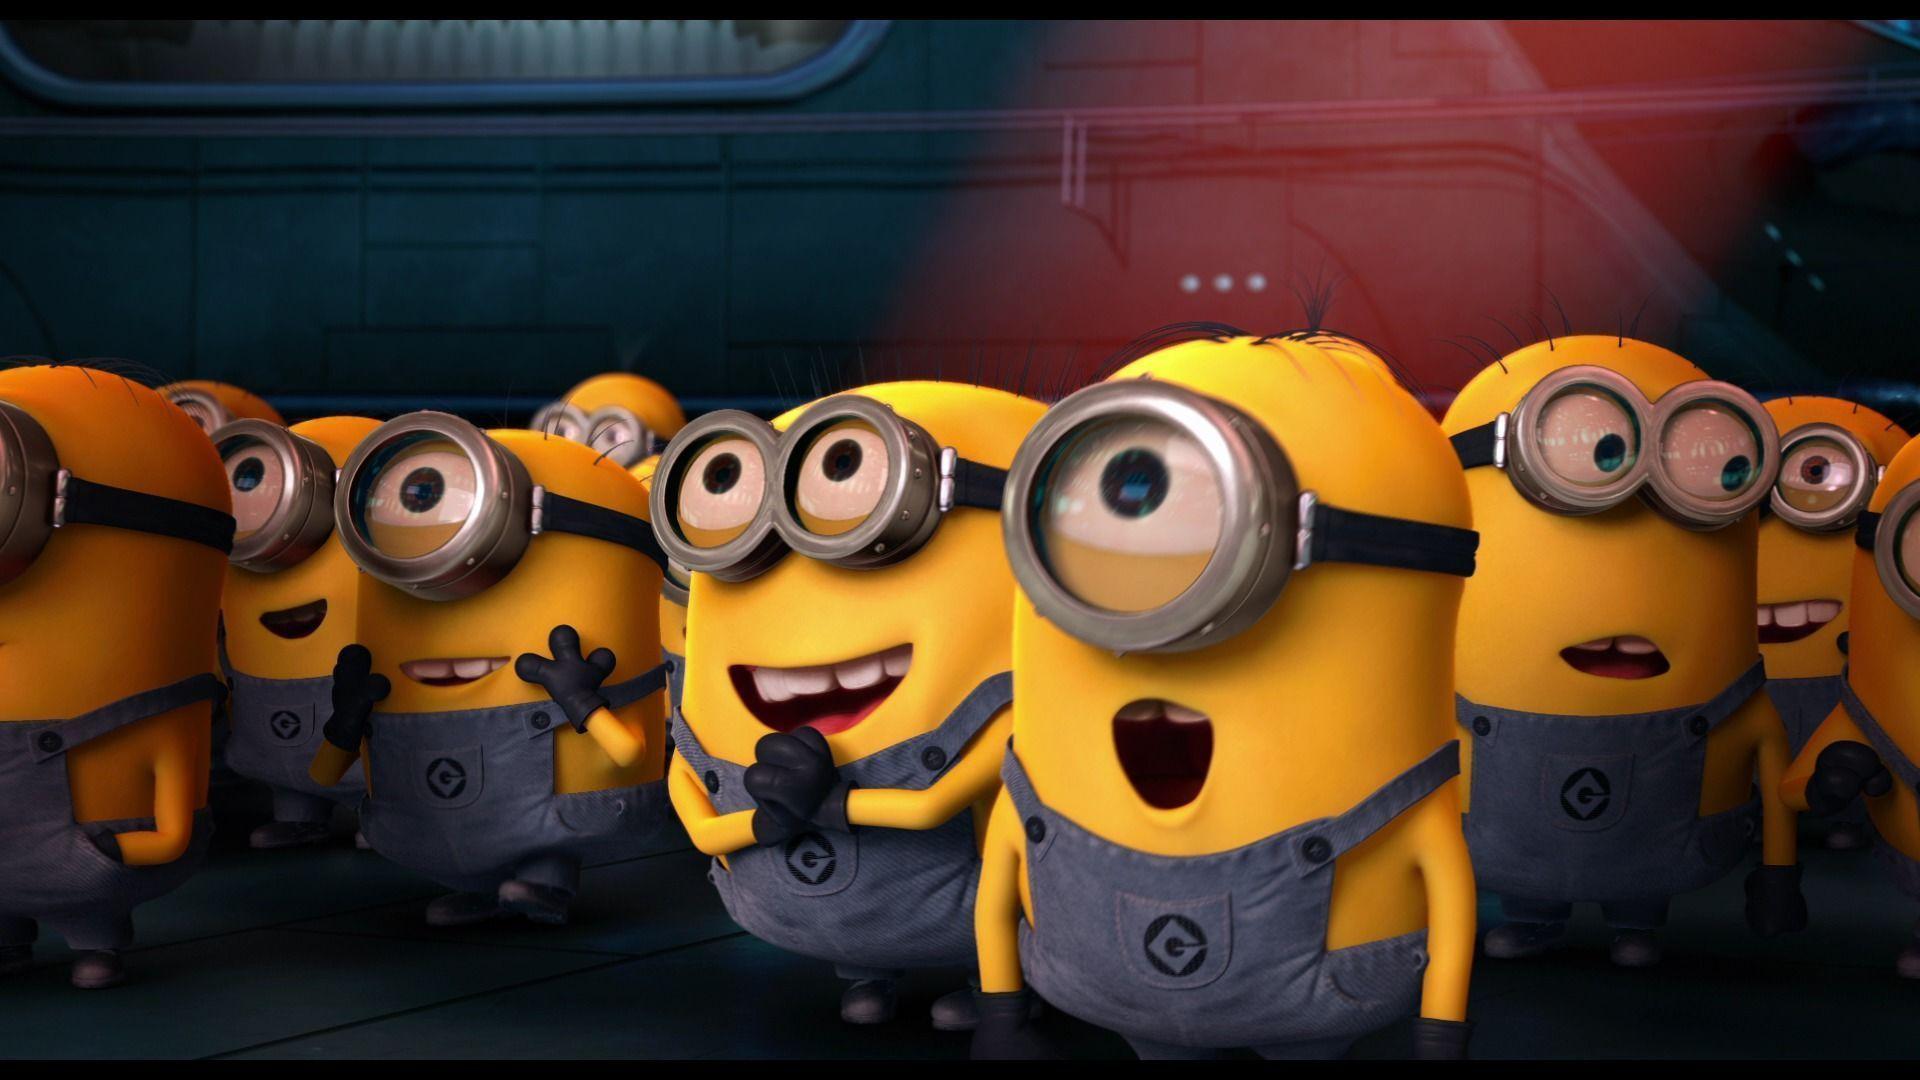 Download HD Minion Wallpaper for Mobile Phones